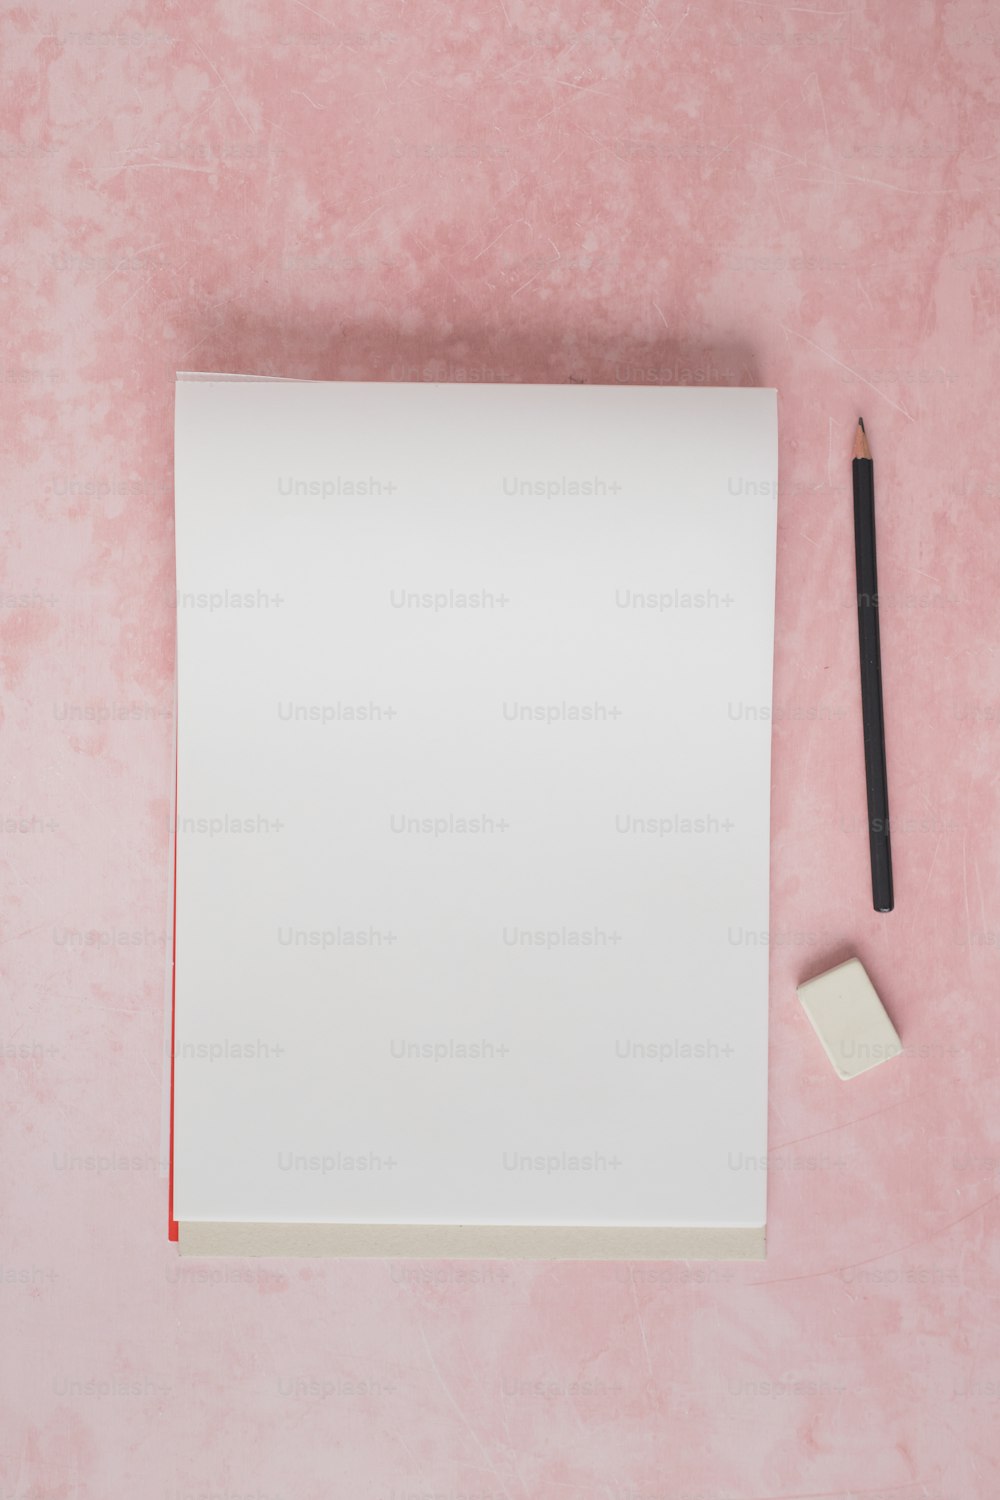 a piece of paper and a pencil on a pink surface